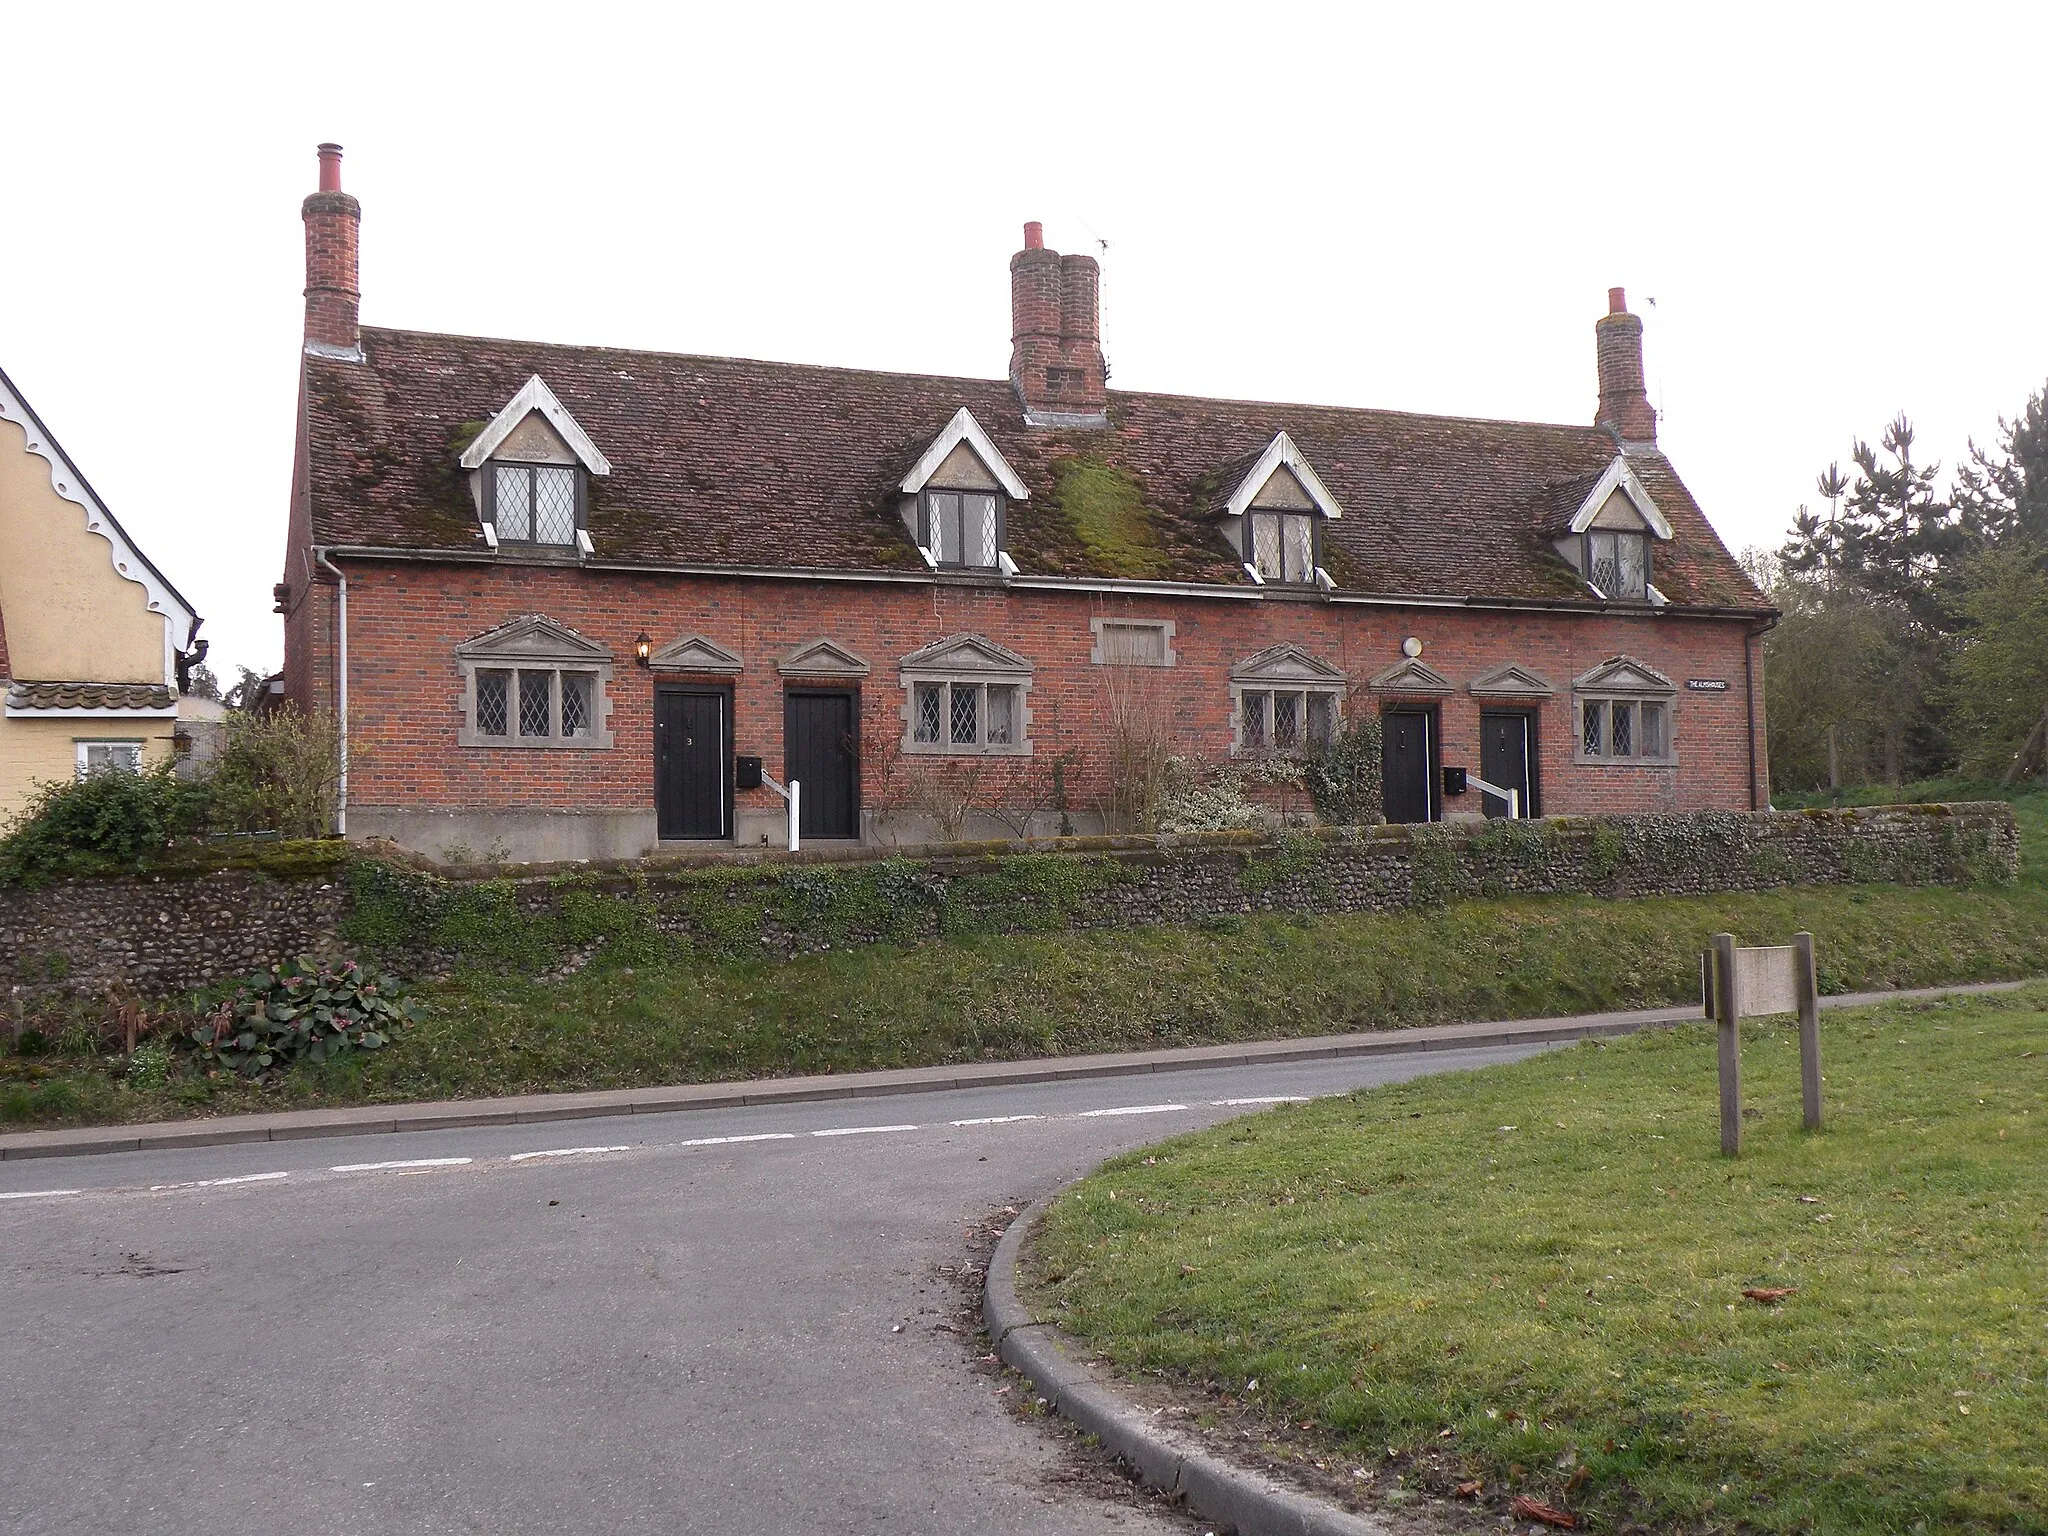 Photo showing: 18th century almshouses by Stowlangtoft church